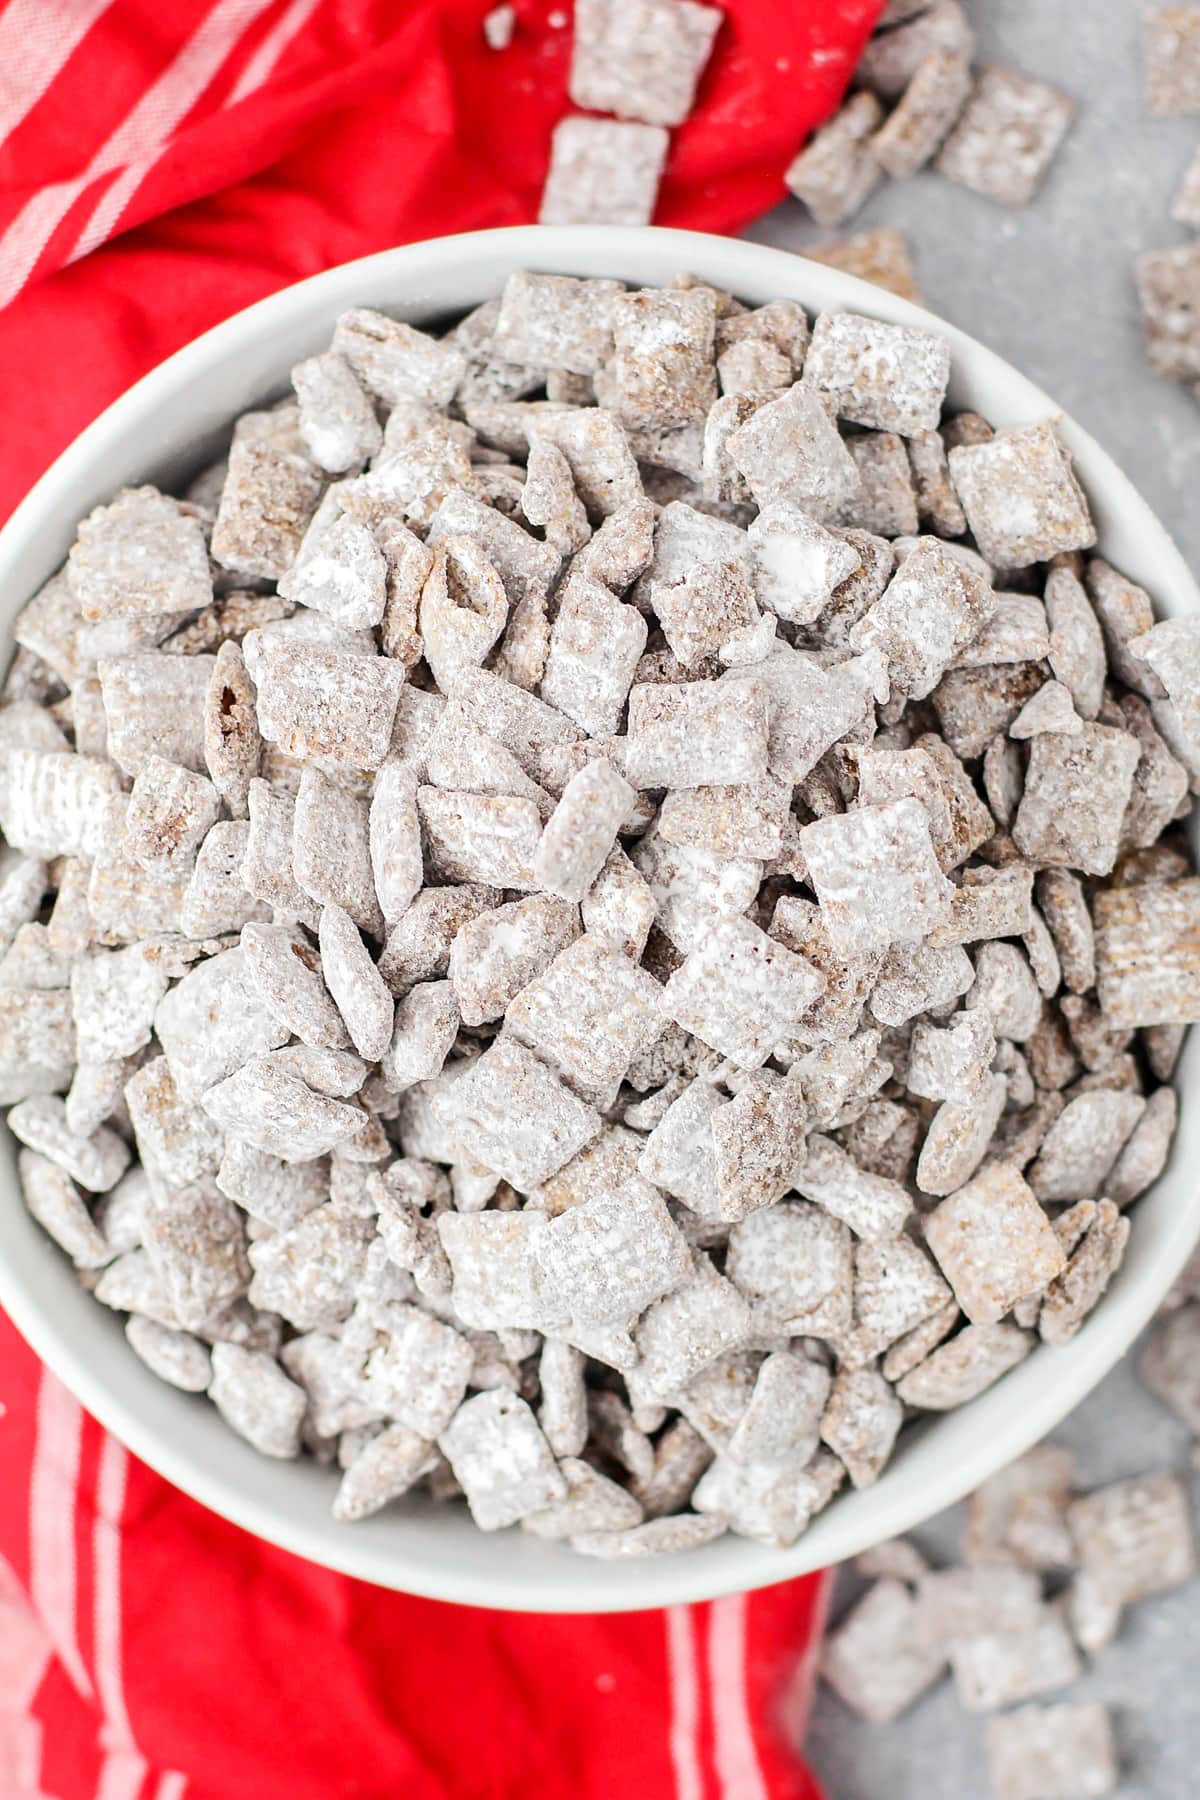 Homemade Puppy Chow recipe in bowl close up image.